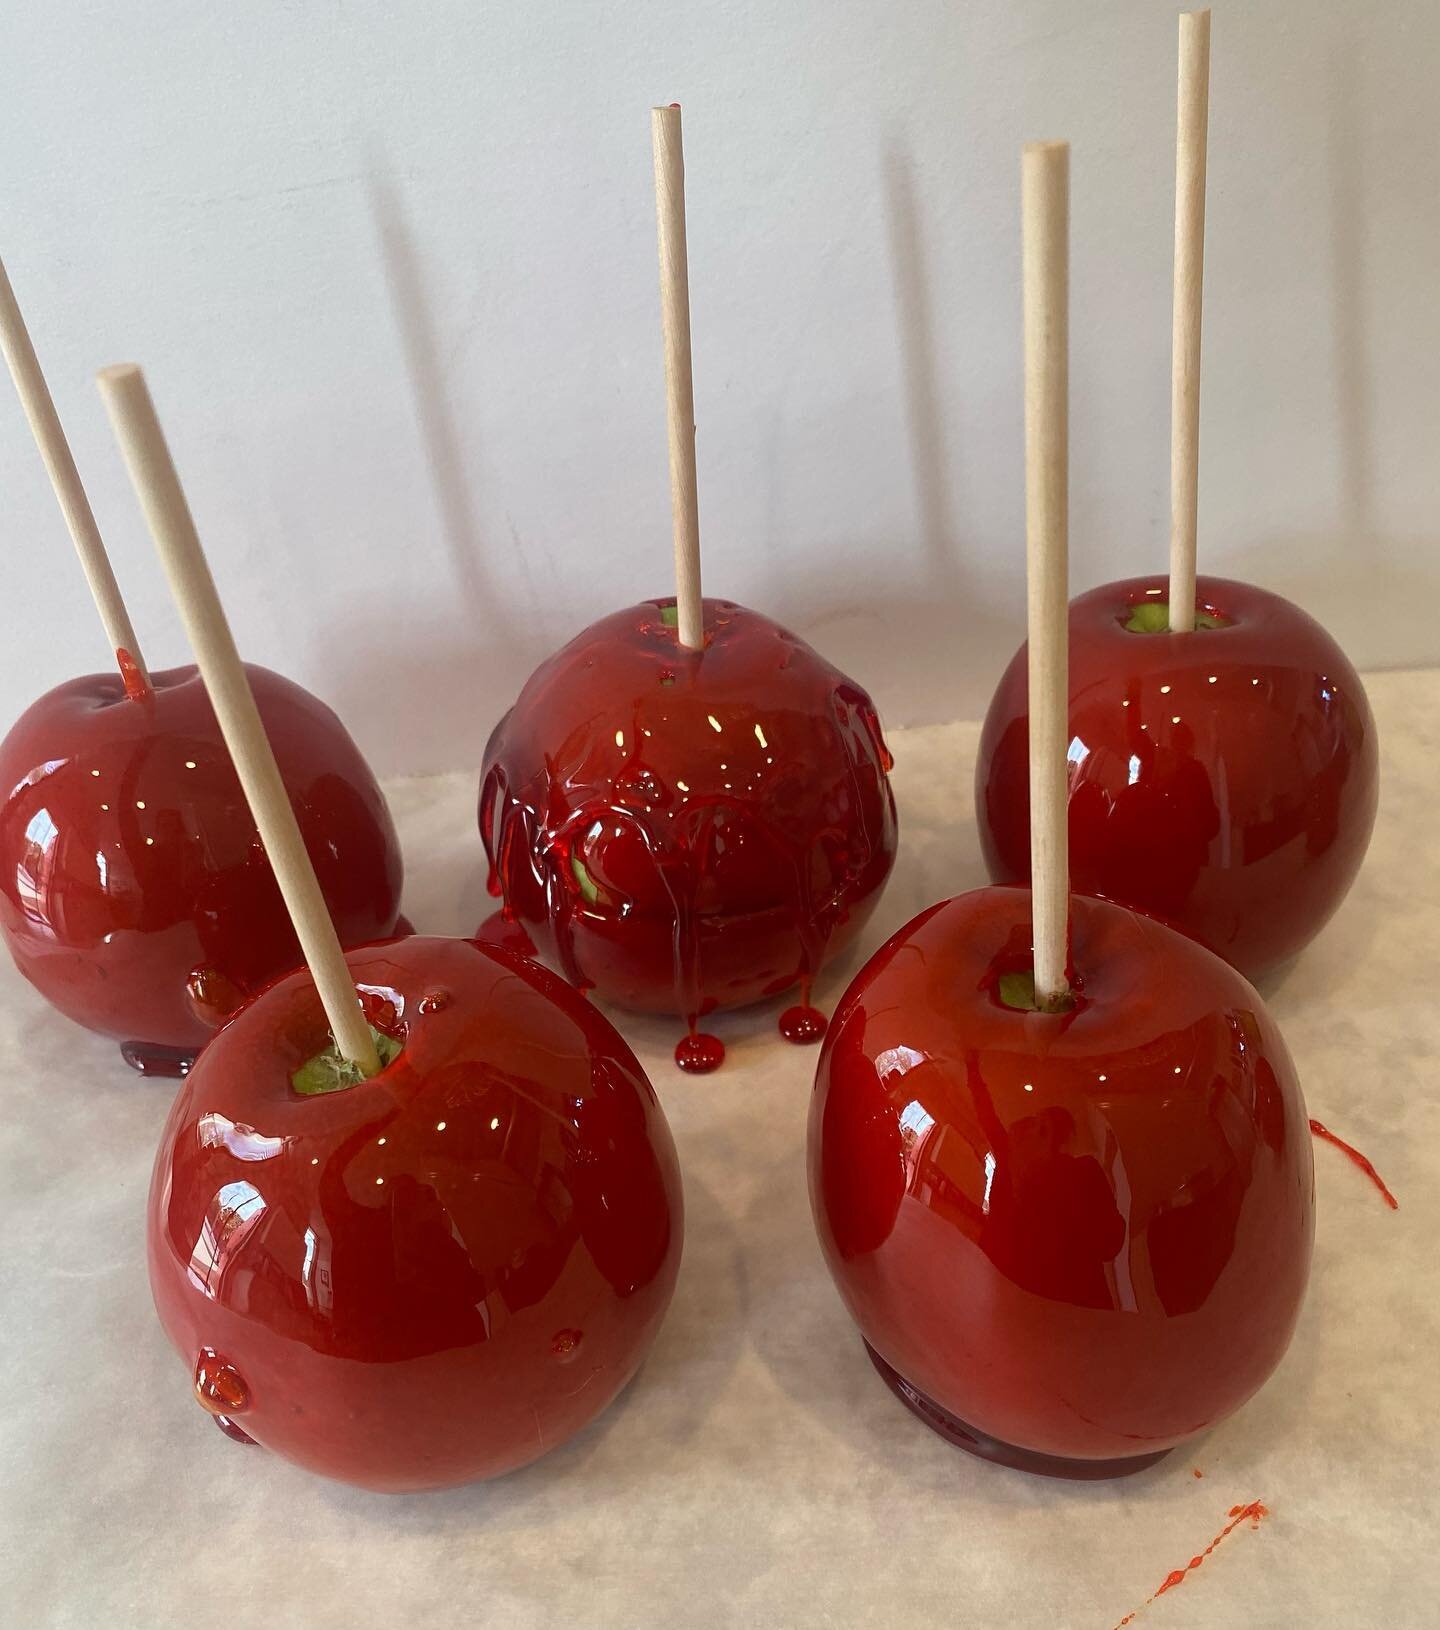 Did you hear that a candied apple a day keeps the Doctor away? Come try for yourself!